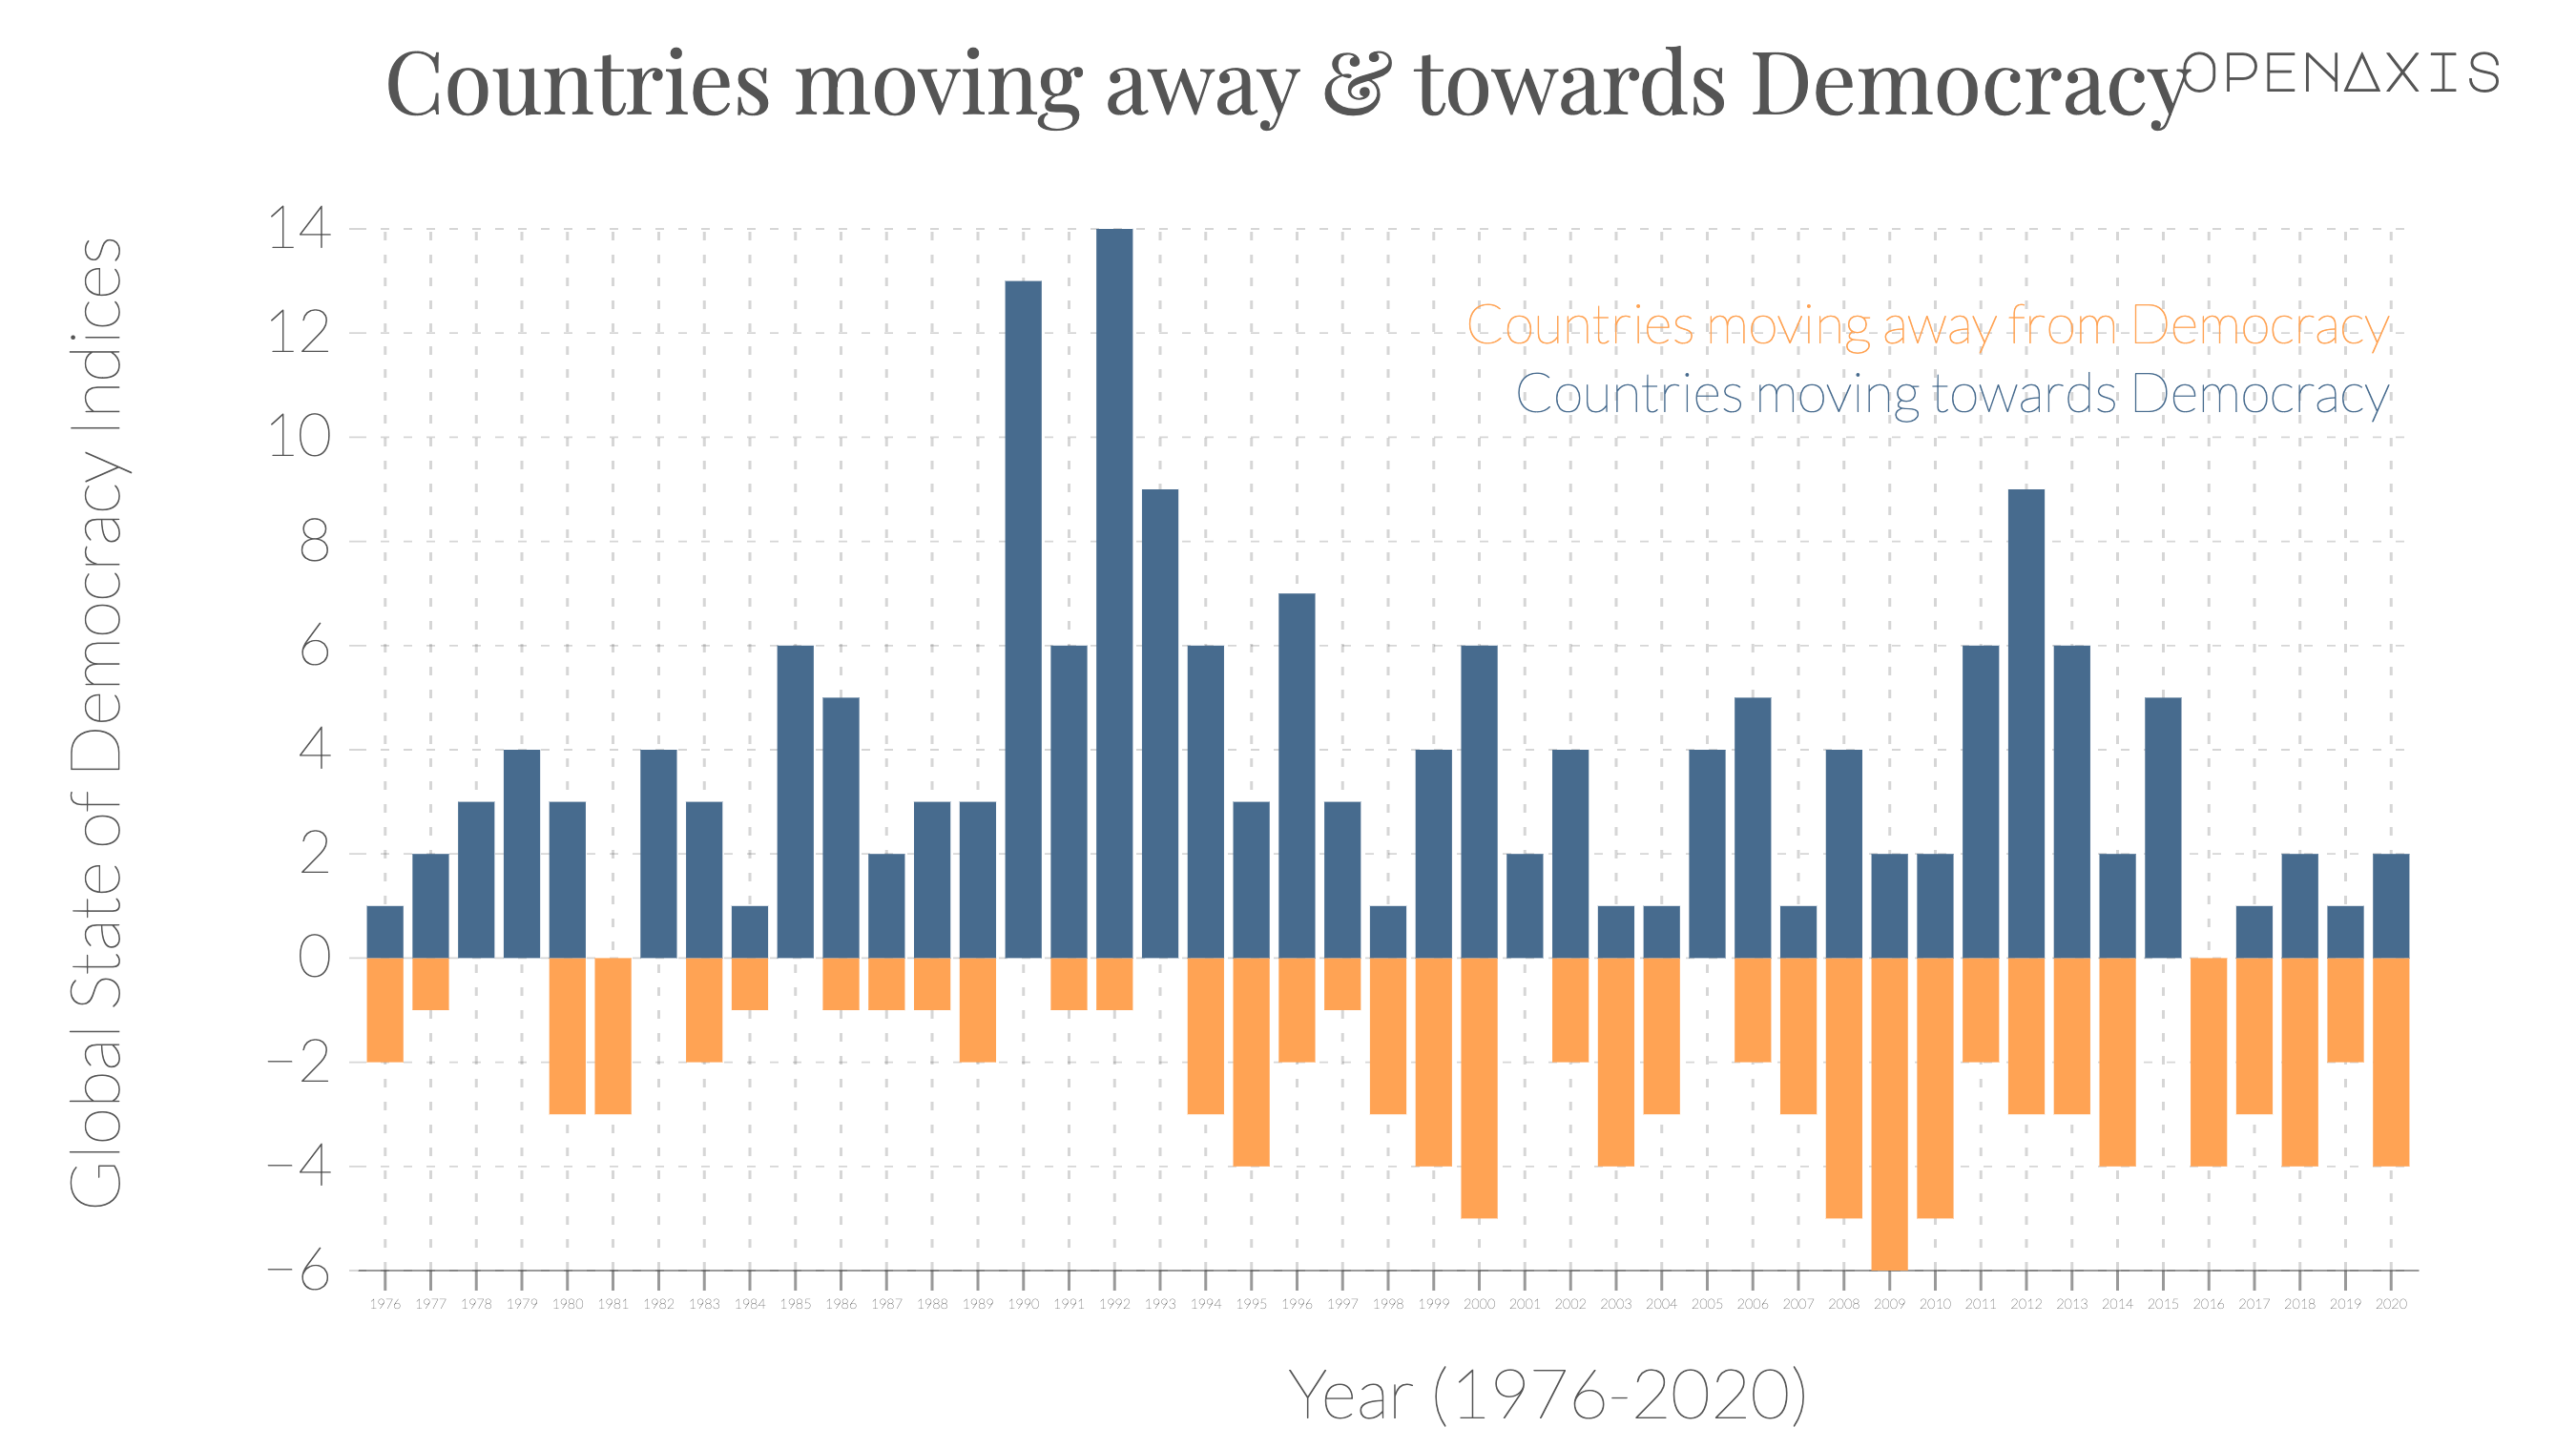 "Countries moving away &  towards Democracy"